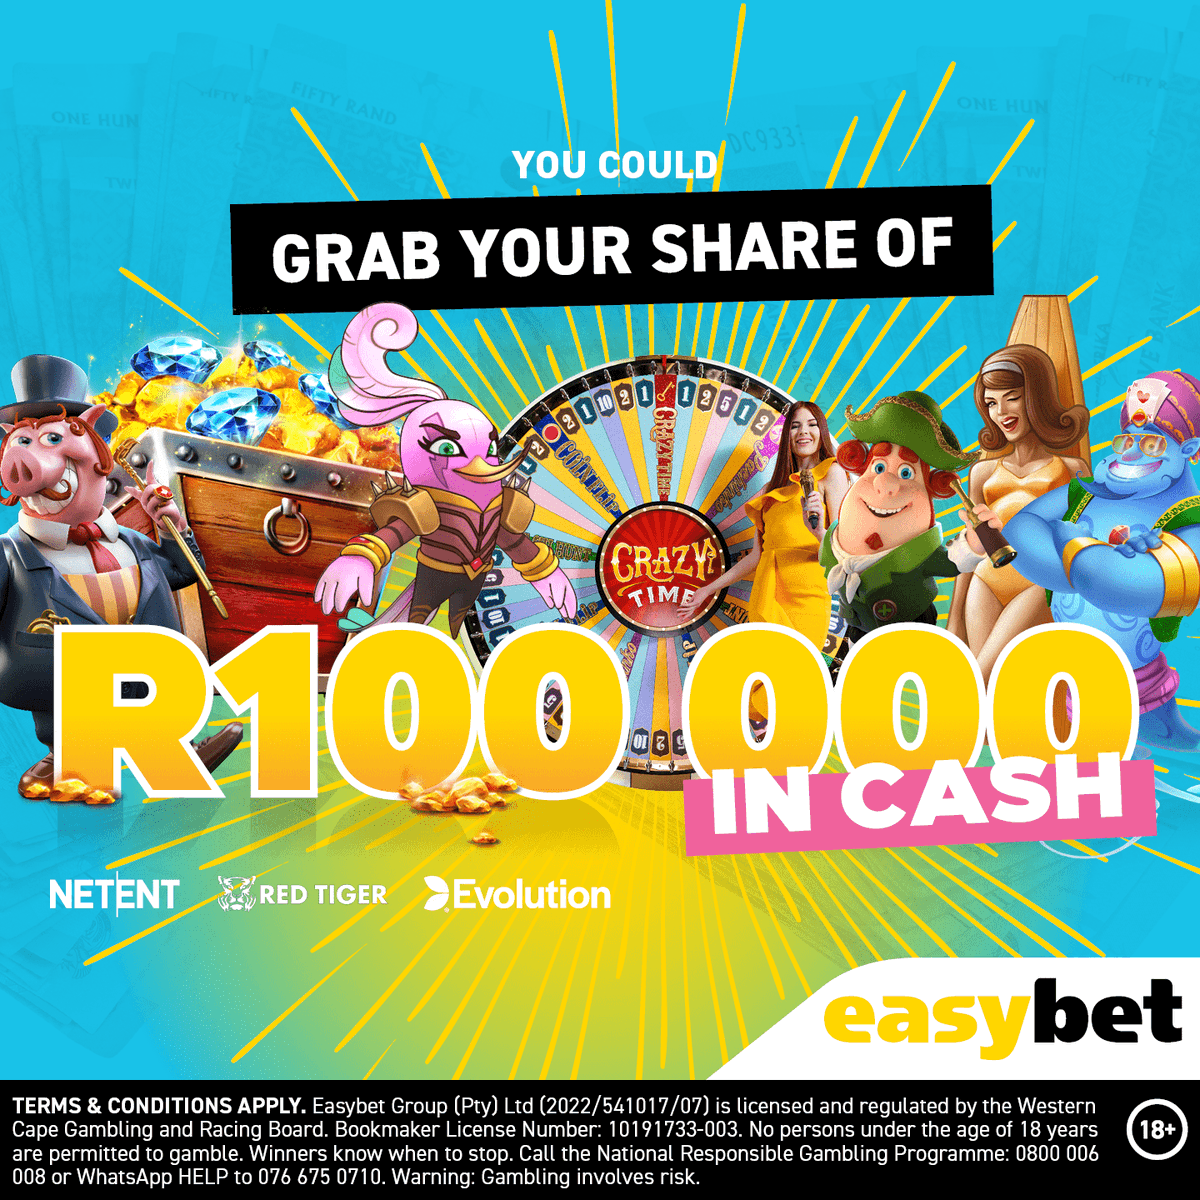 🌟 Win Your Share of R100,000 in CASH with Easybet! 🌟

Dreaming of a cash windfall? Here's your golden ticket! 💸 Participate in our thrilling promotion and stand a chance to win a share of R100,000 IN CASH! 🎉

How to Enter:

🎰 Play any qualifying NetEnt, Evolution, or Red